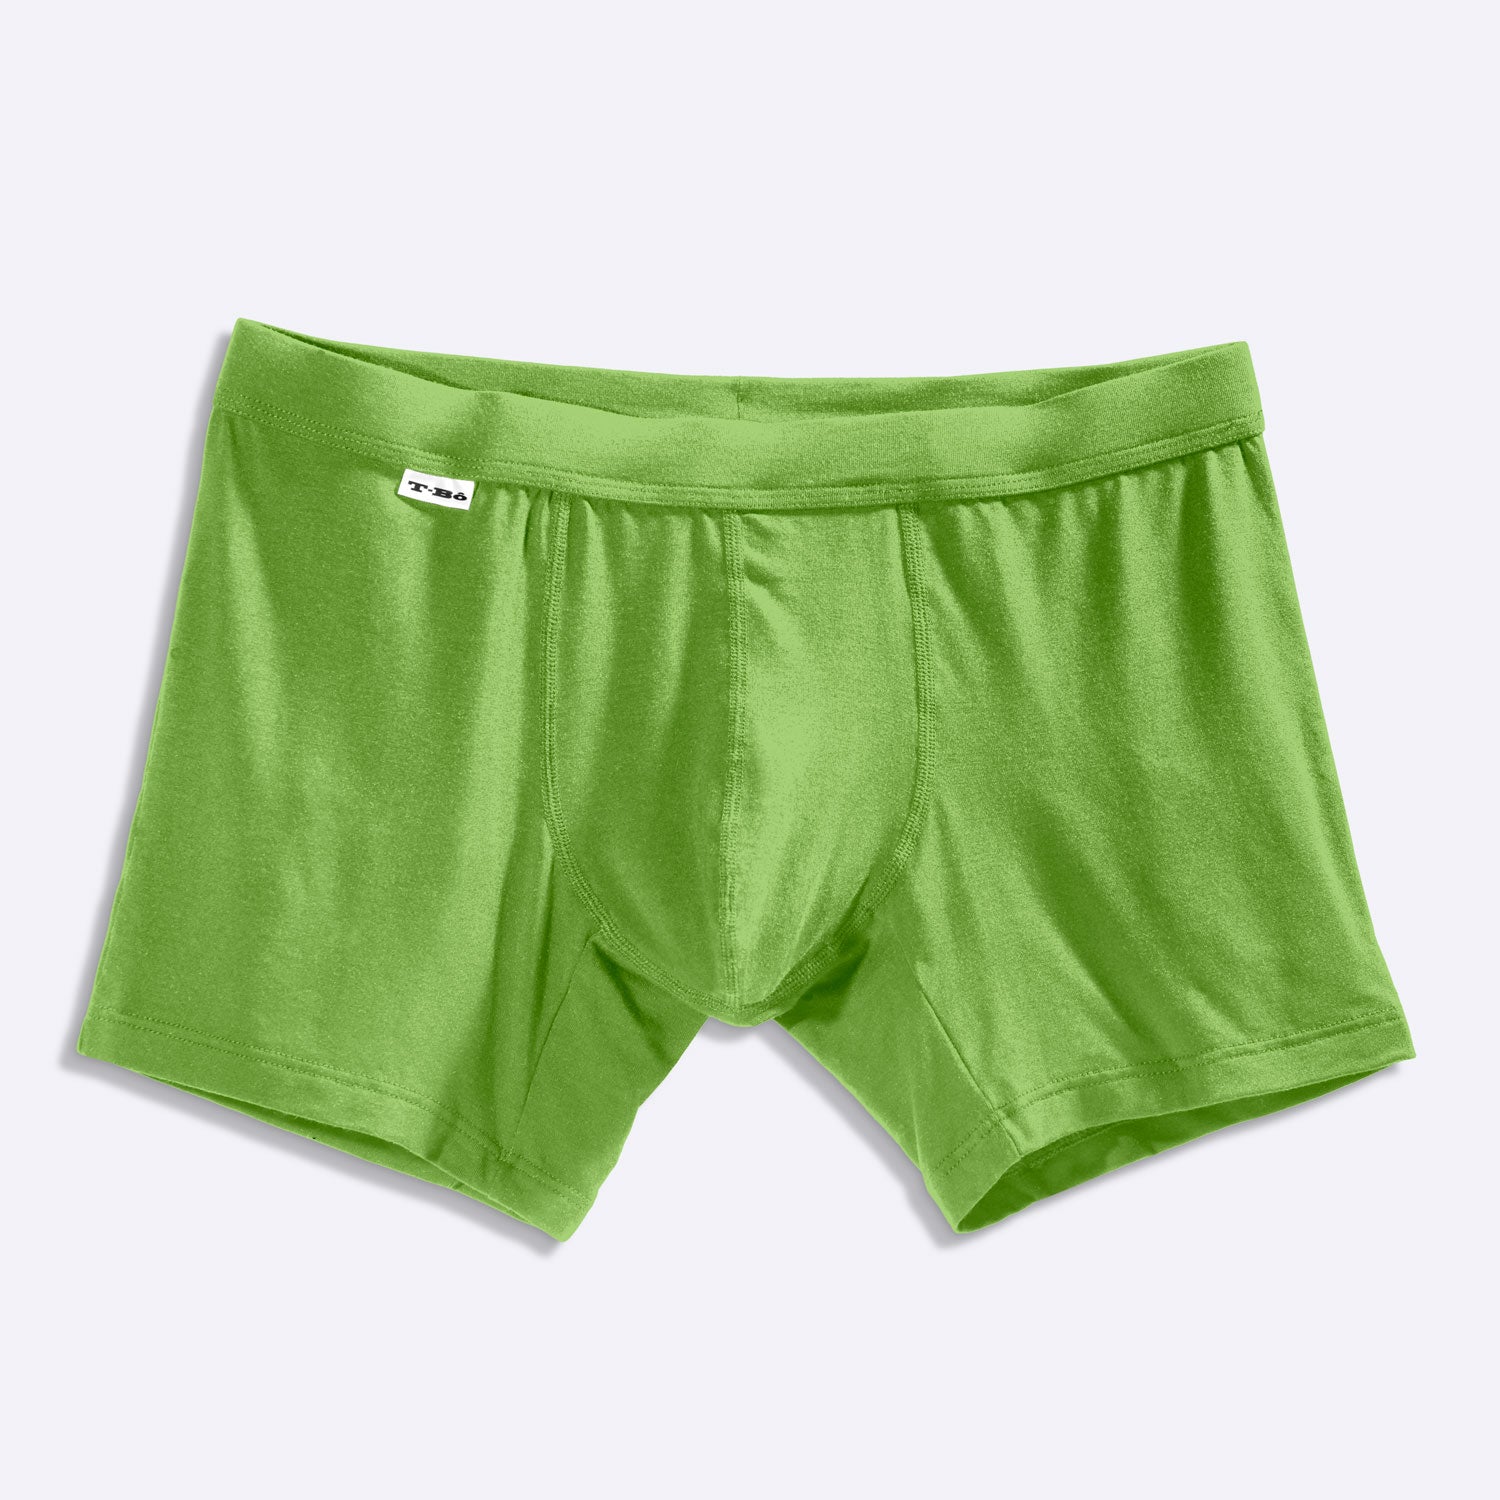 The Limited Edition Greenery Boxer Brief for men in the USA and Canada